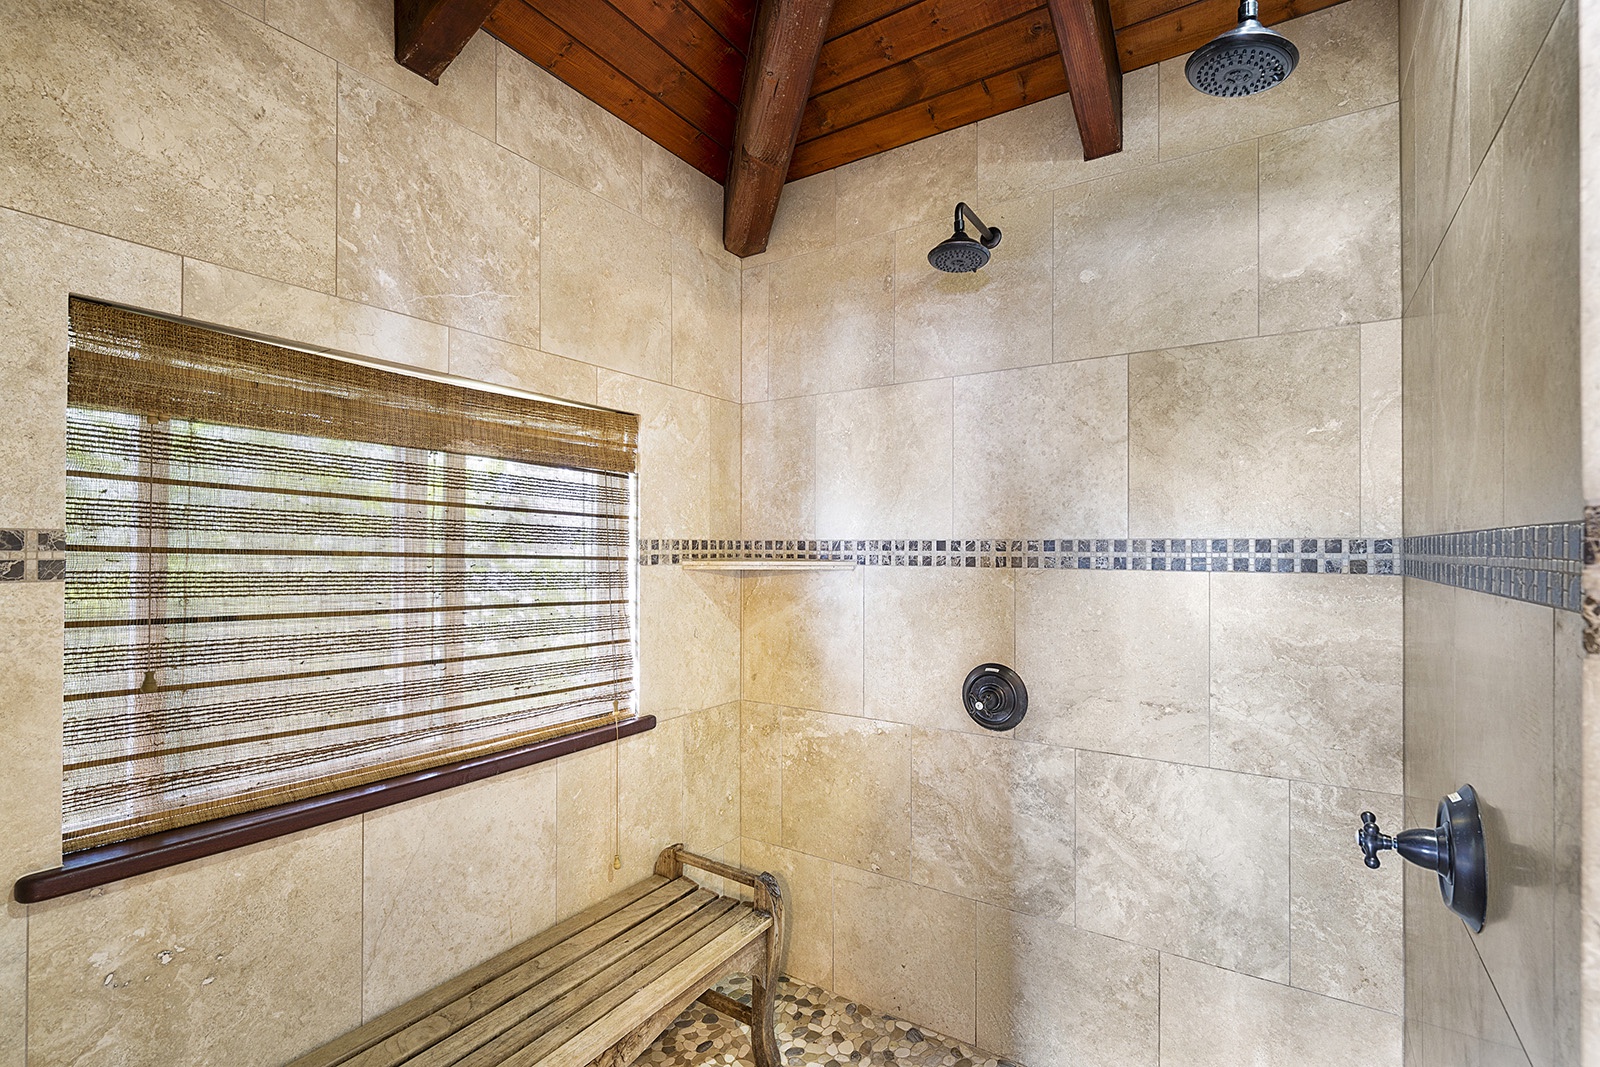 Kailua Kona Vacation Rentals, Mermaid Cove - Walk in steam shower with two heads!